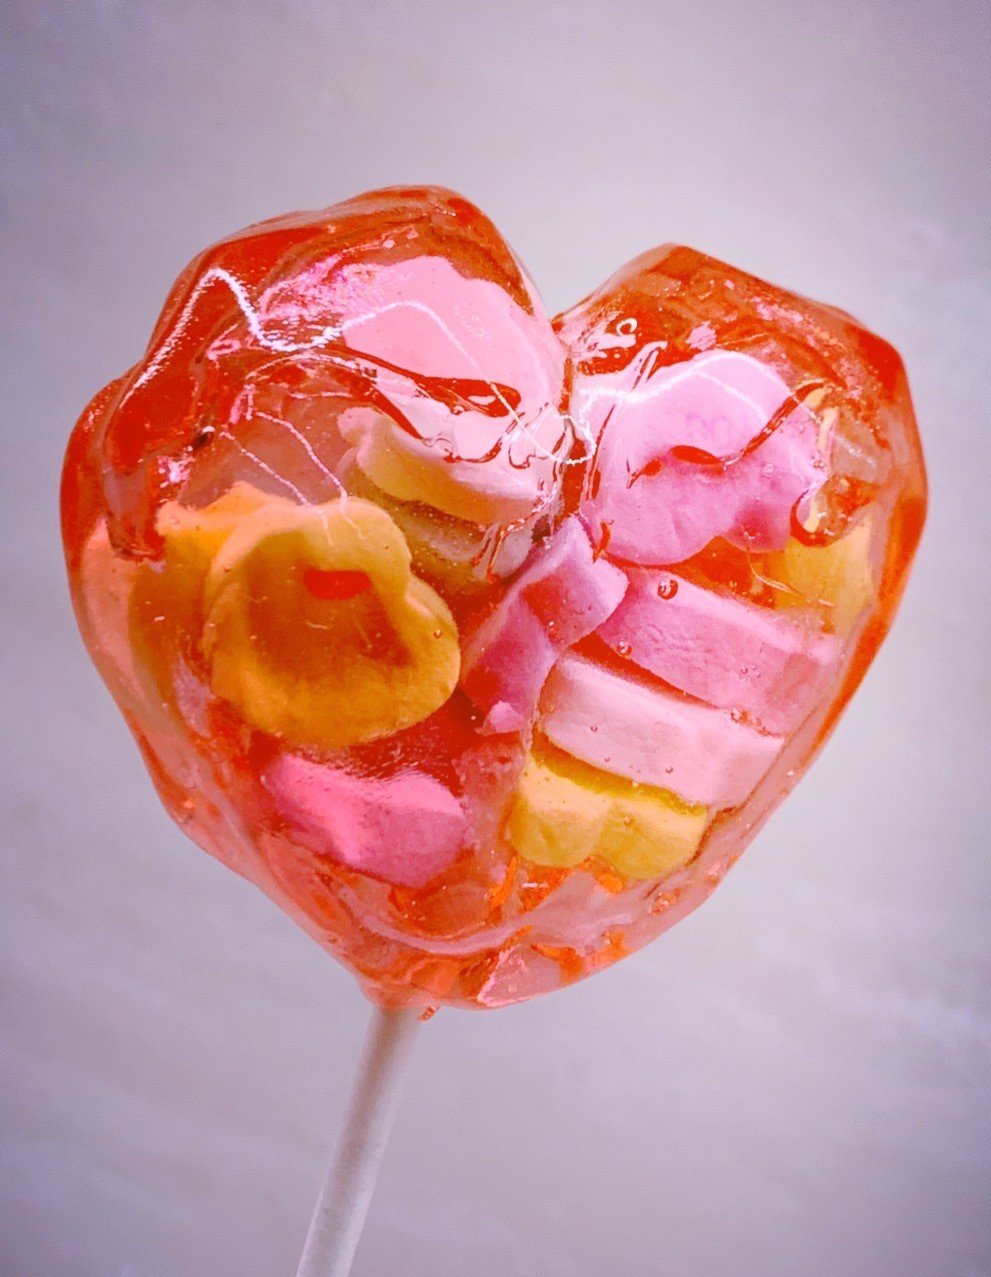 The completed Valentine candy lollipop.